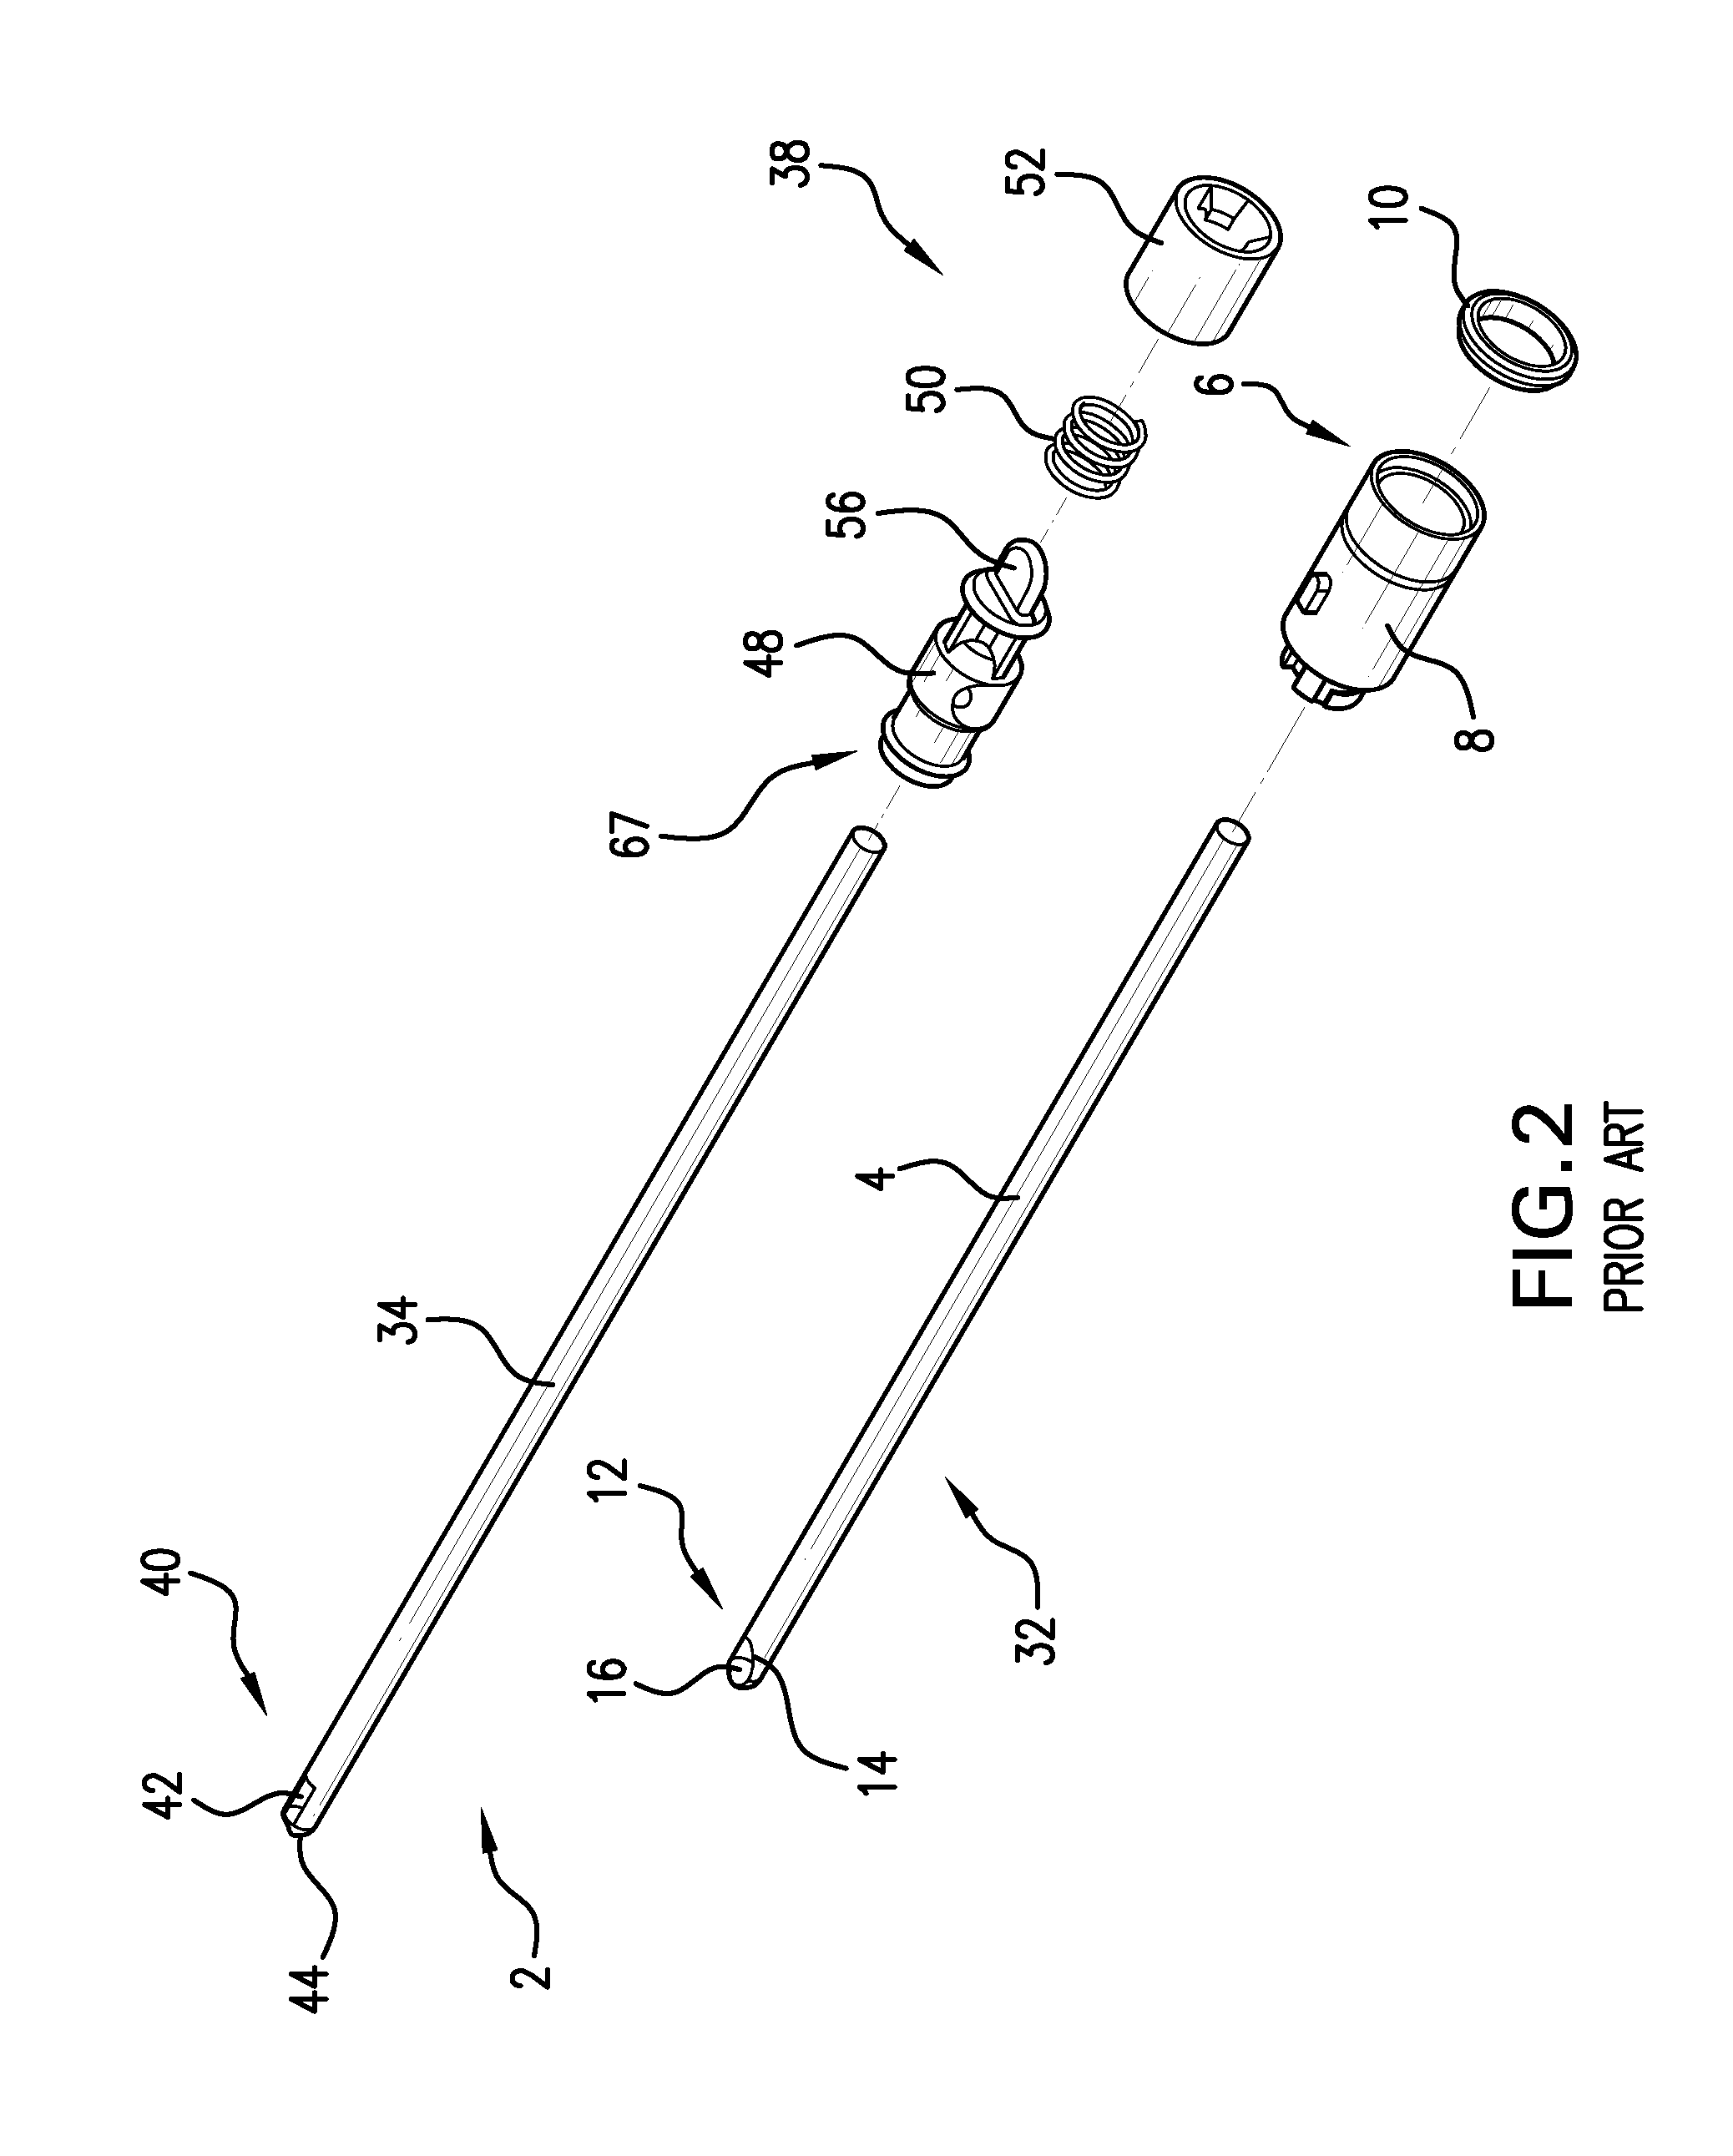 Endoscopic cutting instruments having improved cutting efficiency and reduced manufacturing costs